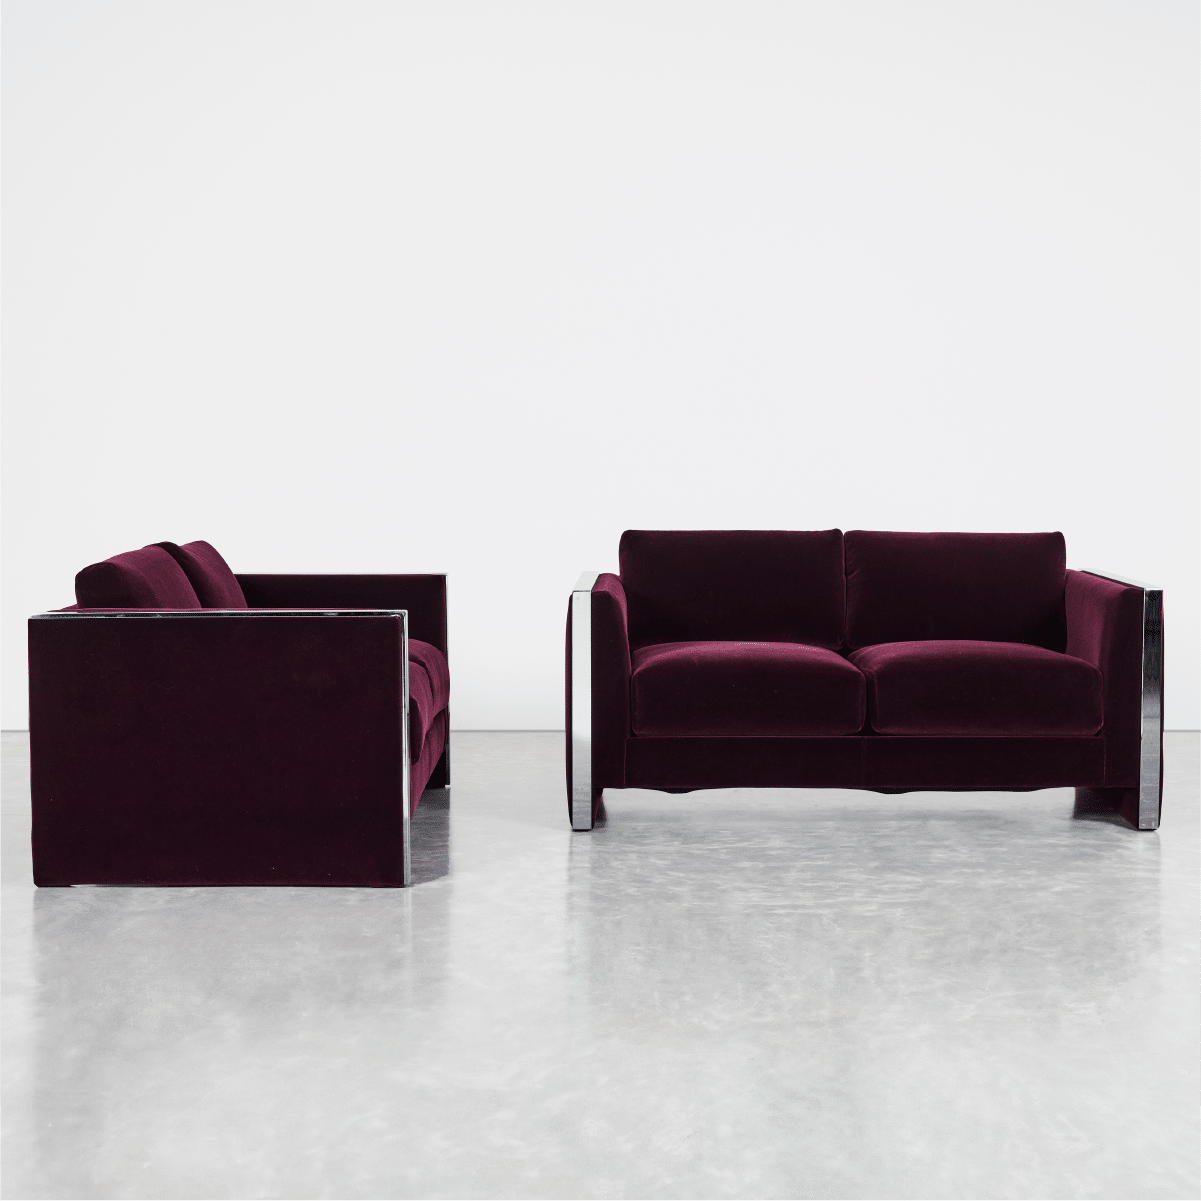 Low res for web_Pair of Cubo Sofas